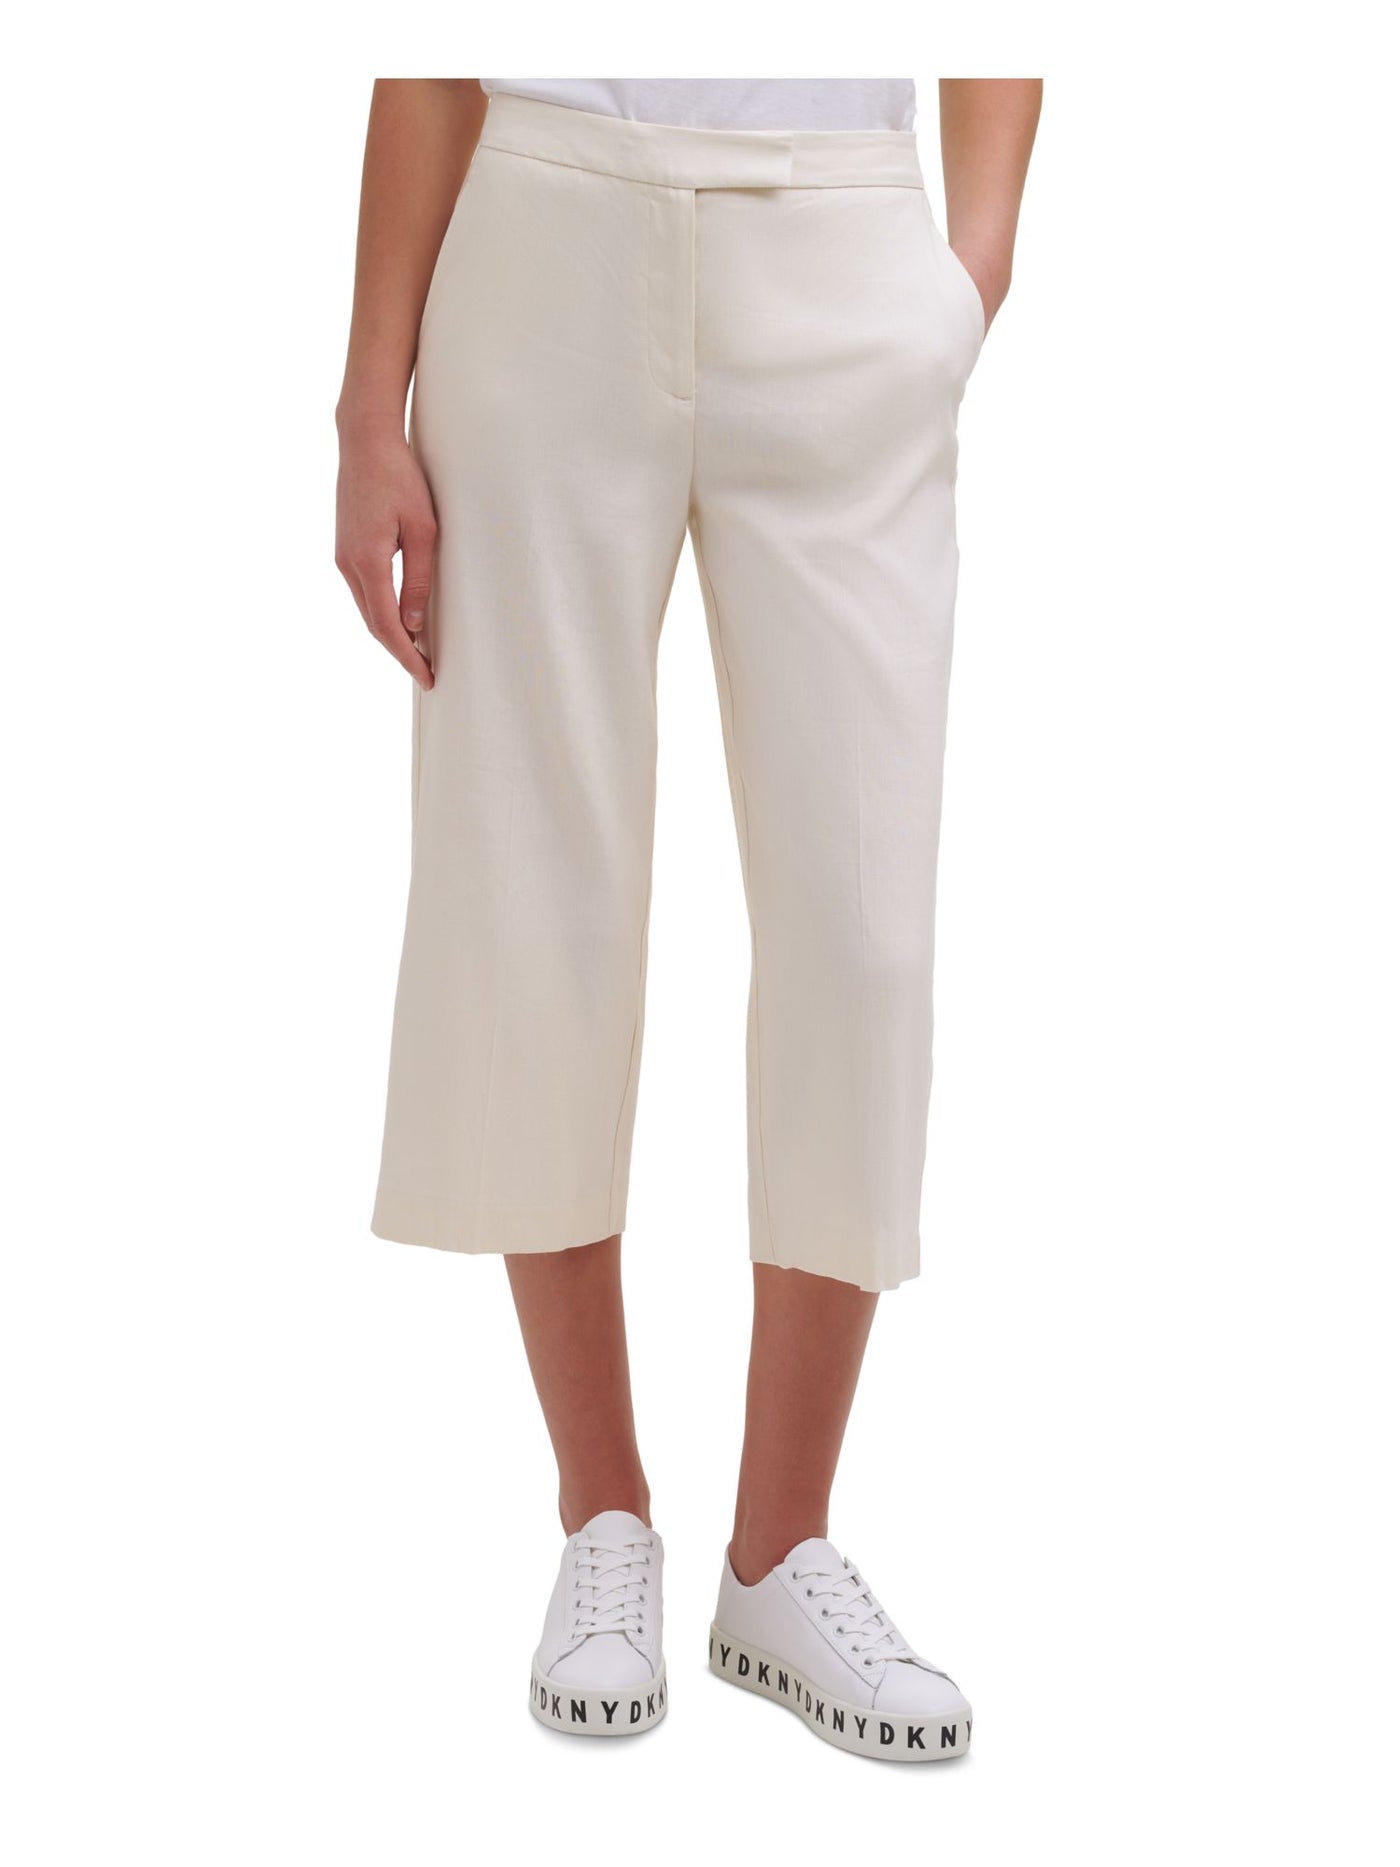 DKNY Womens Ivory Stretch Pocketed Zippered Front Tab Cropped Pants 8